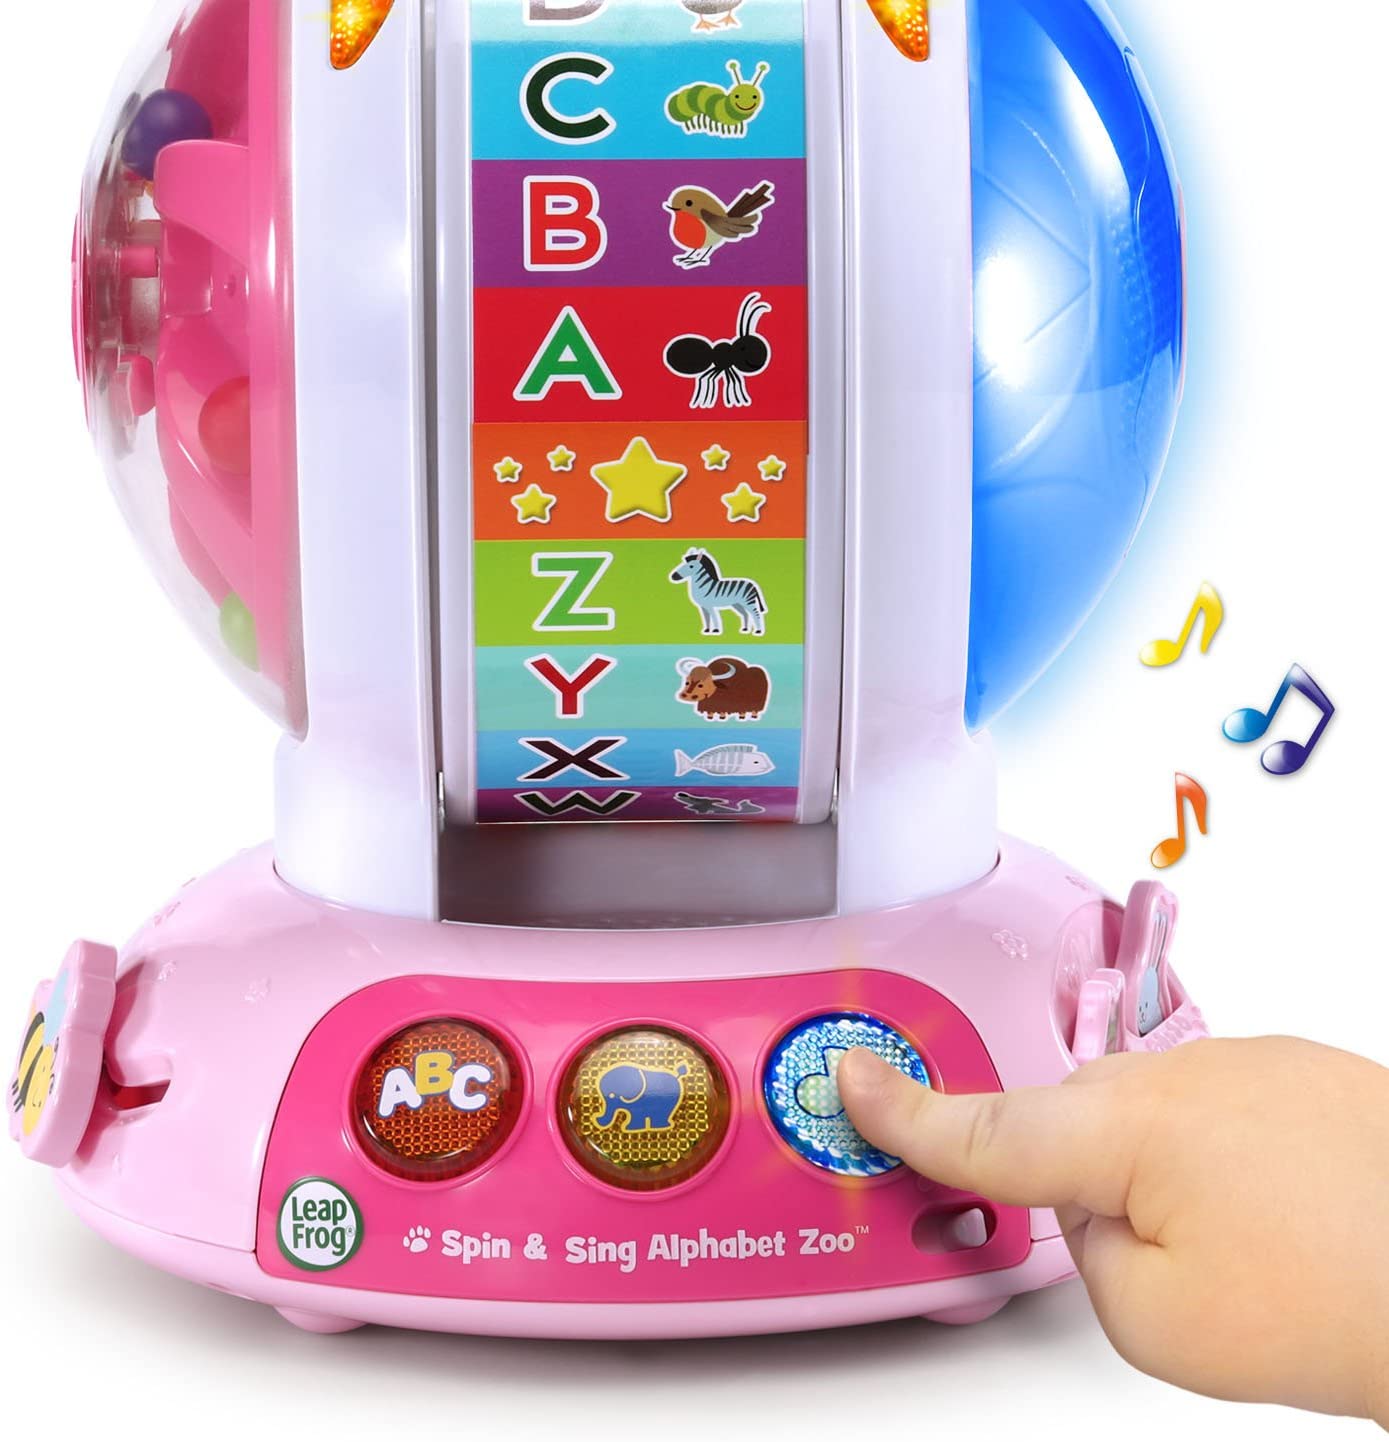 LeapFrog Spin and Sing Alphabet Zoo, Pink - Introduces letters A-Z and animal names and sounds